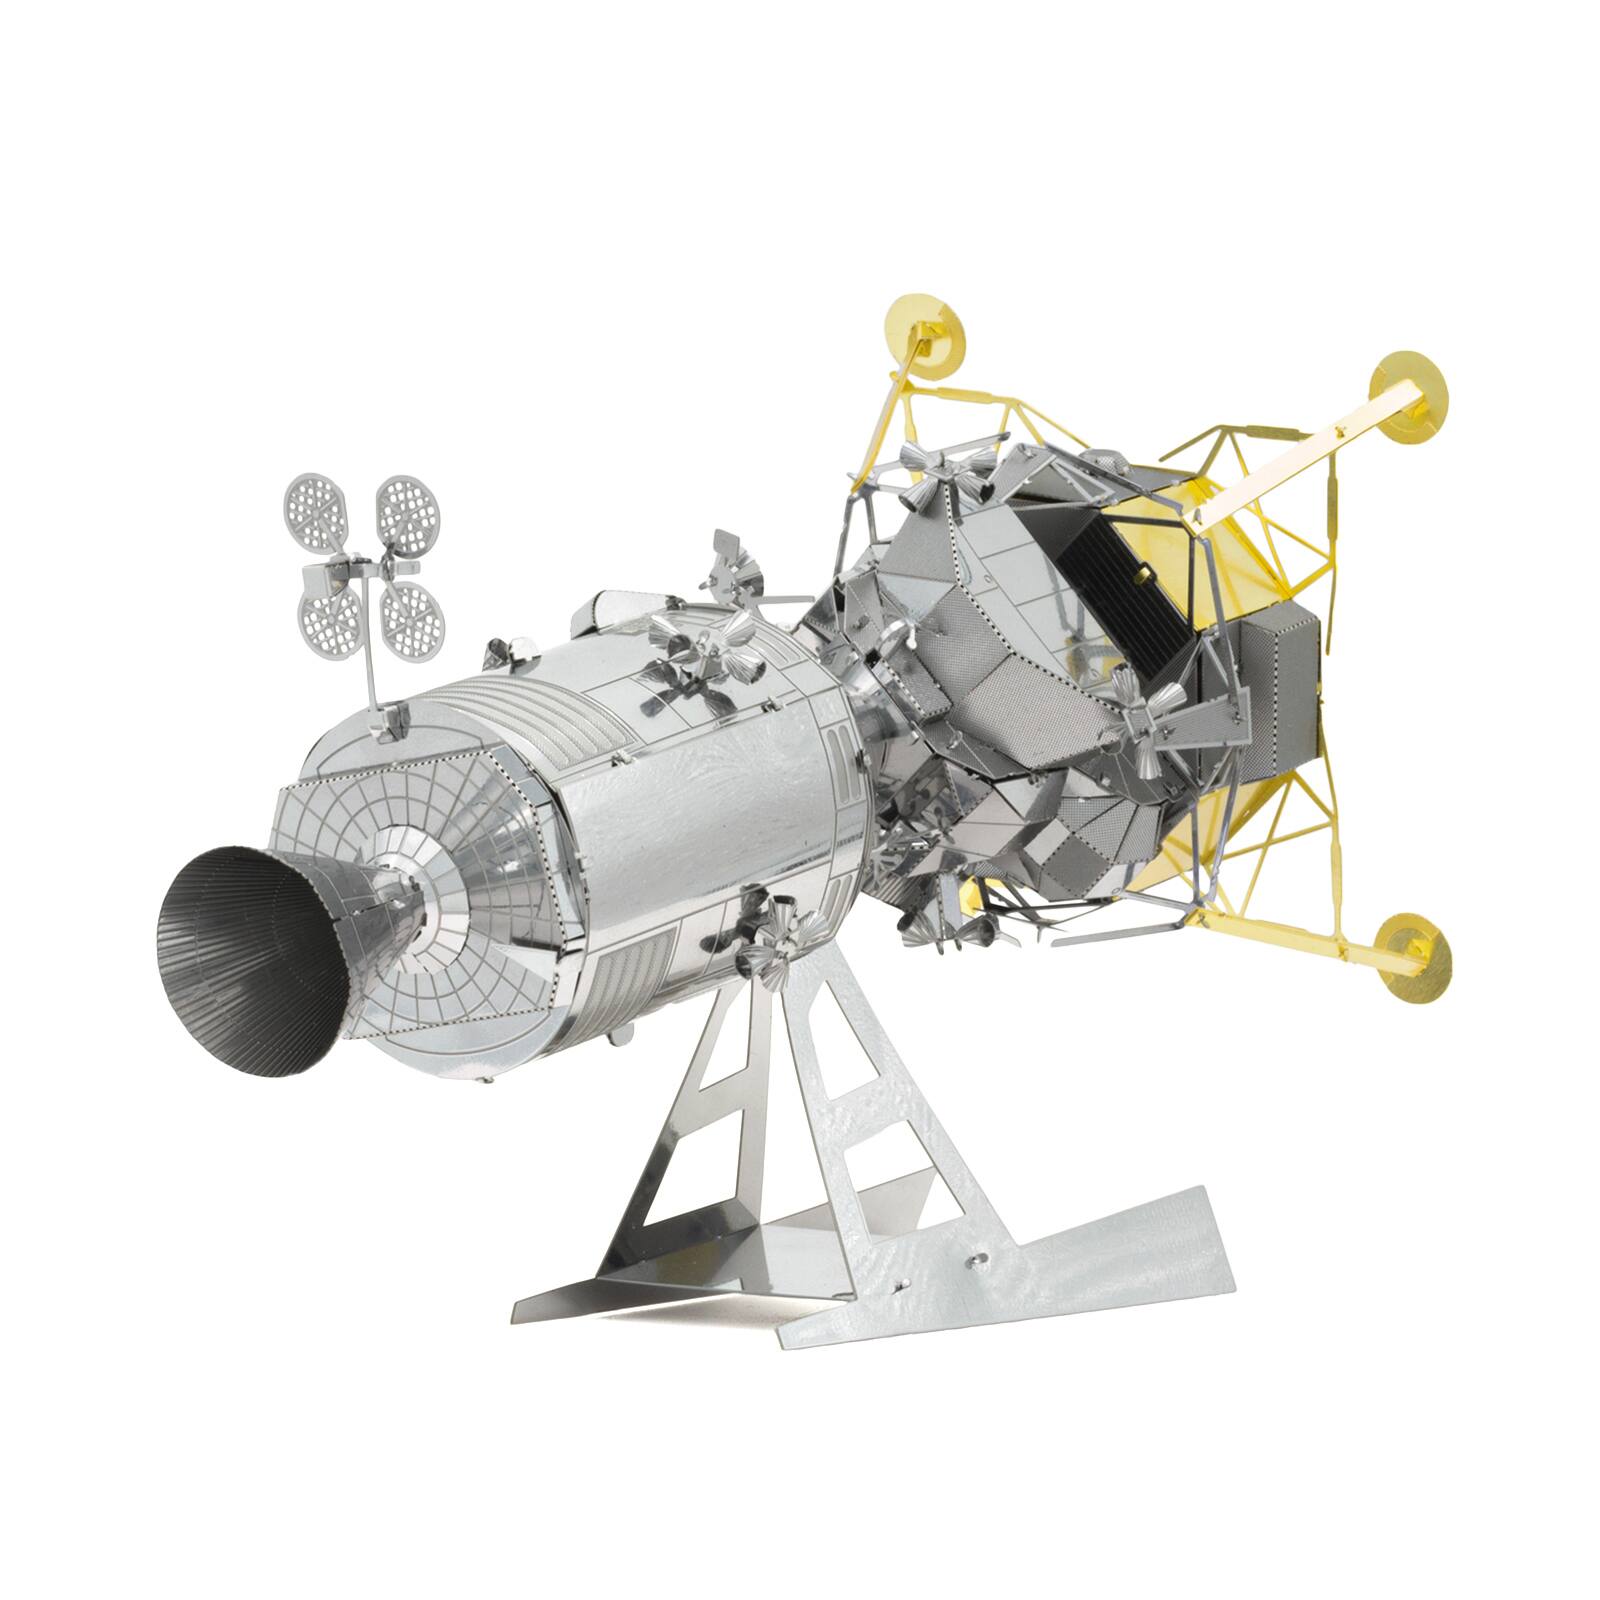 Details about   Fascinations Metal Earth 3D Steel Model Kit Apollo CSM with LM 